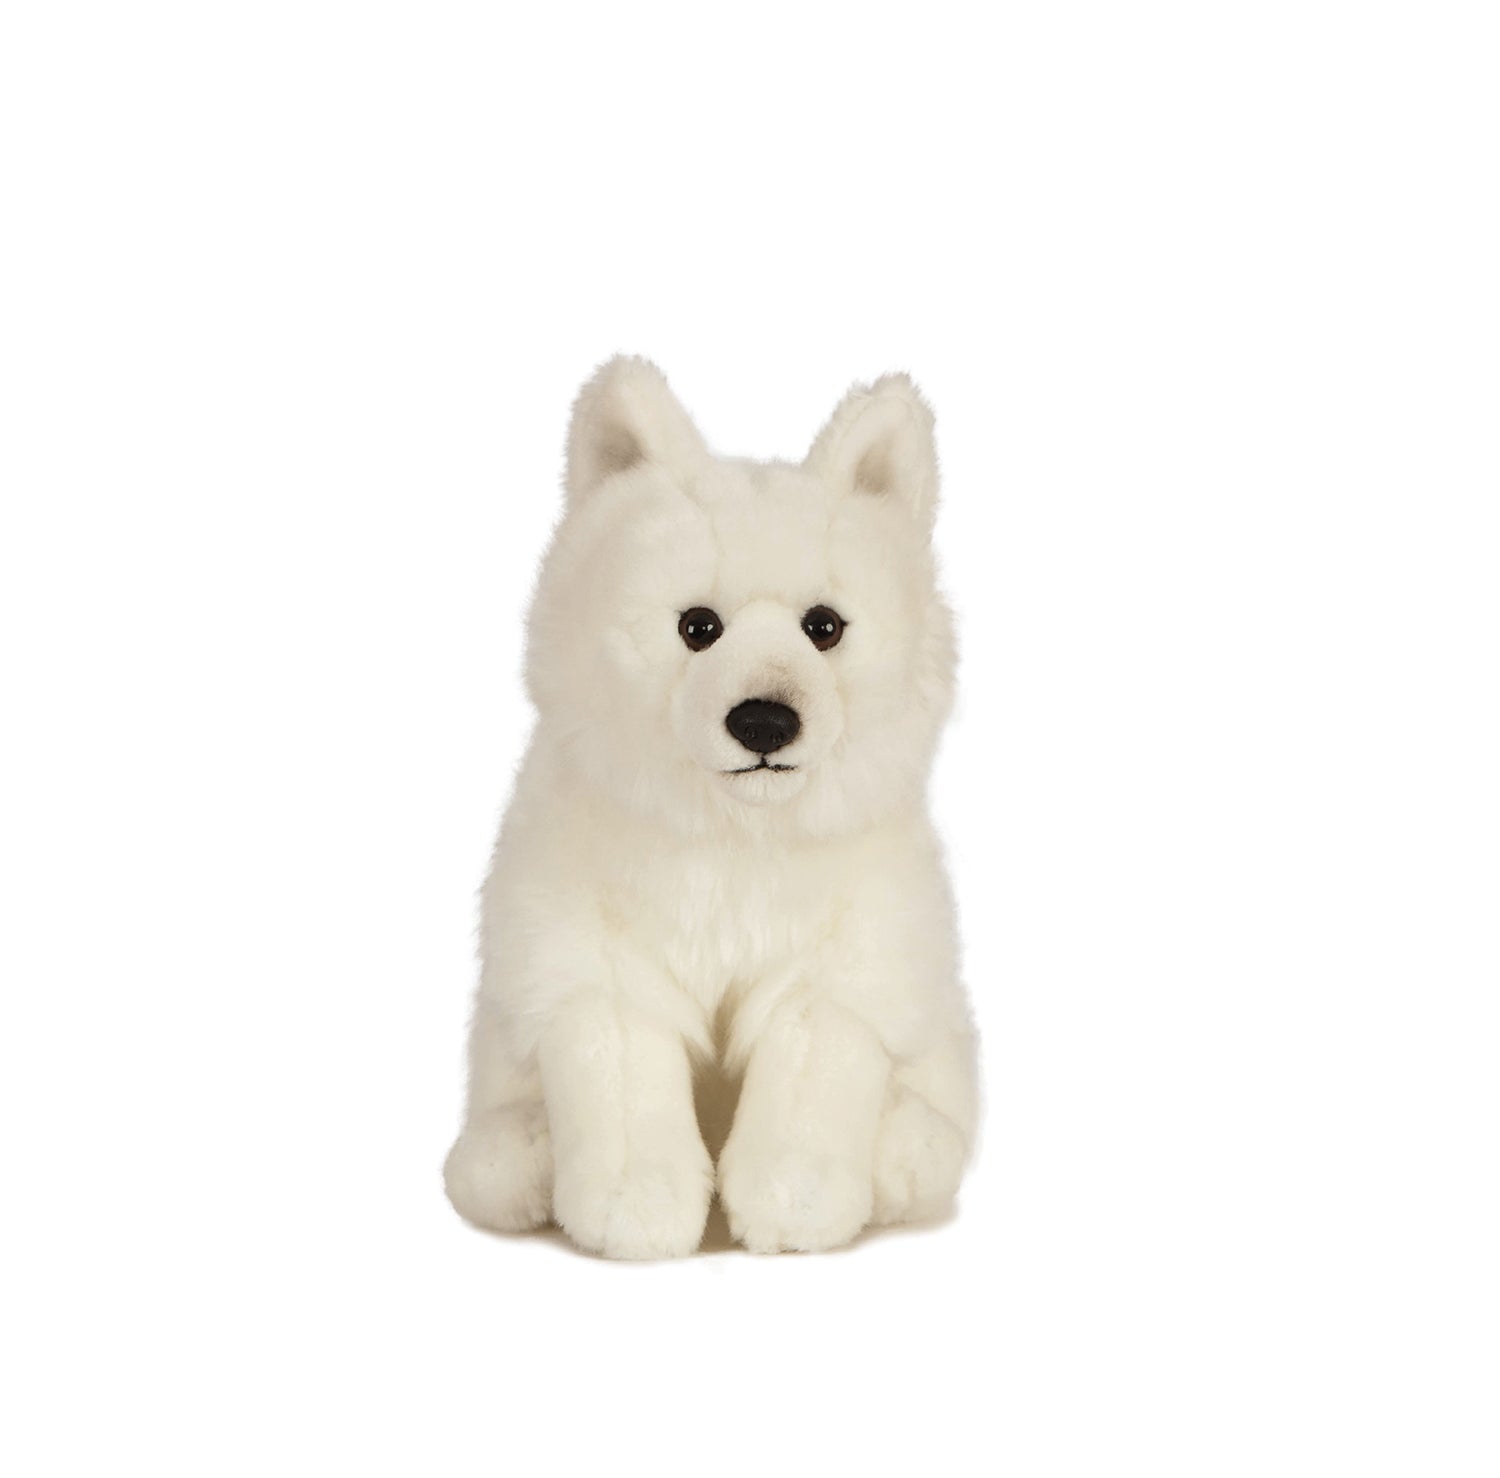 Arctic Fox Plush Toy, Eco Friendly Gifts